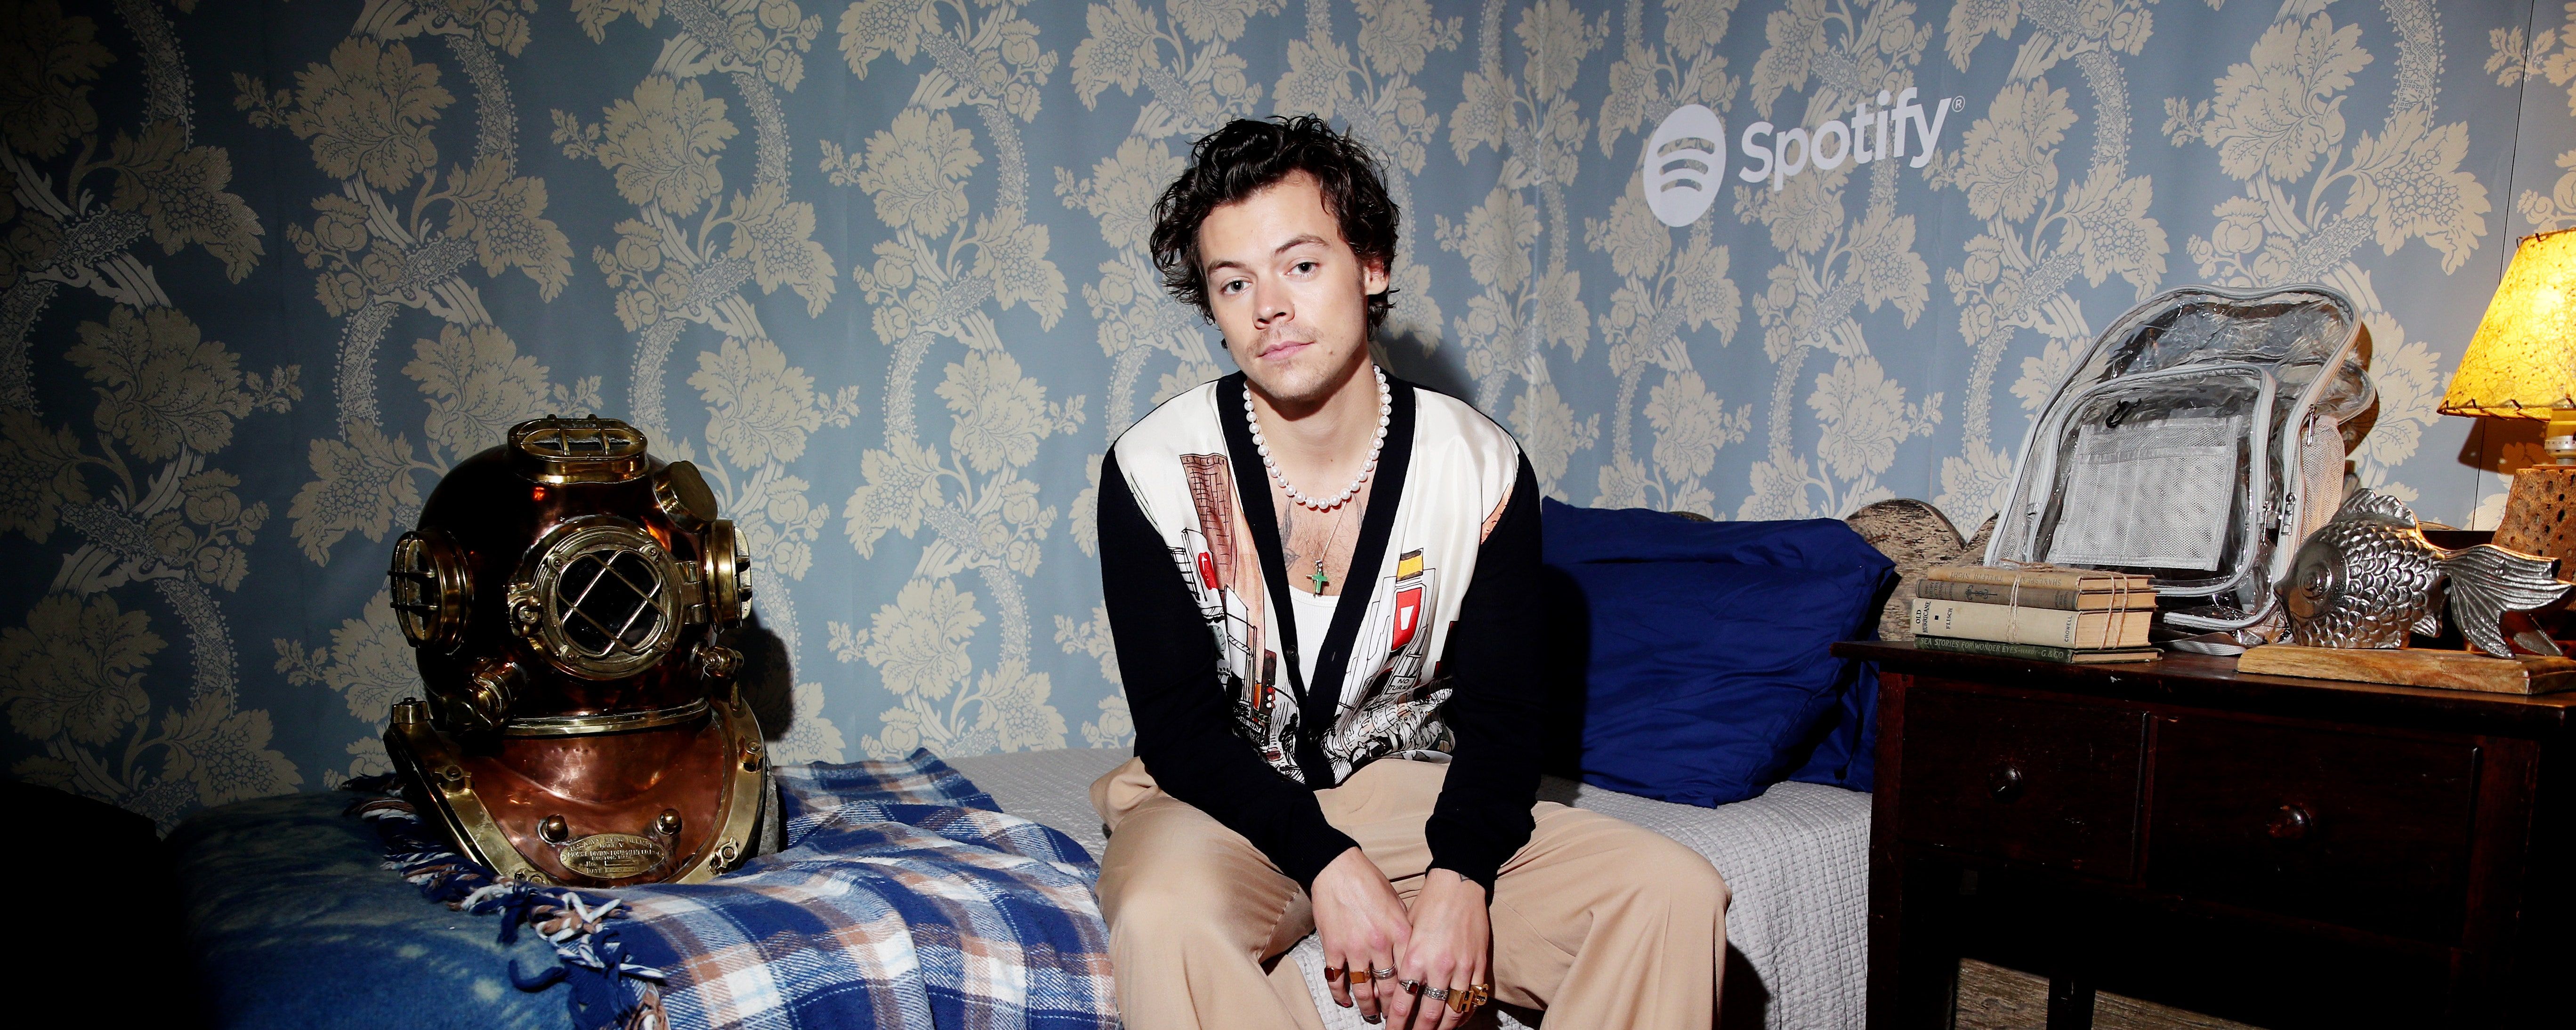 Harry Styles Wore a Very Ruffled Dress for “The Guardian Weekend